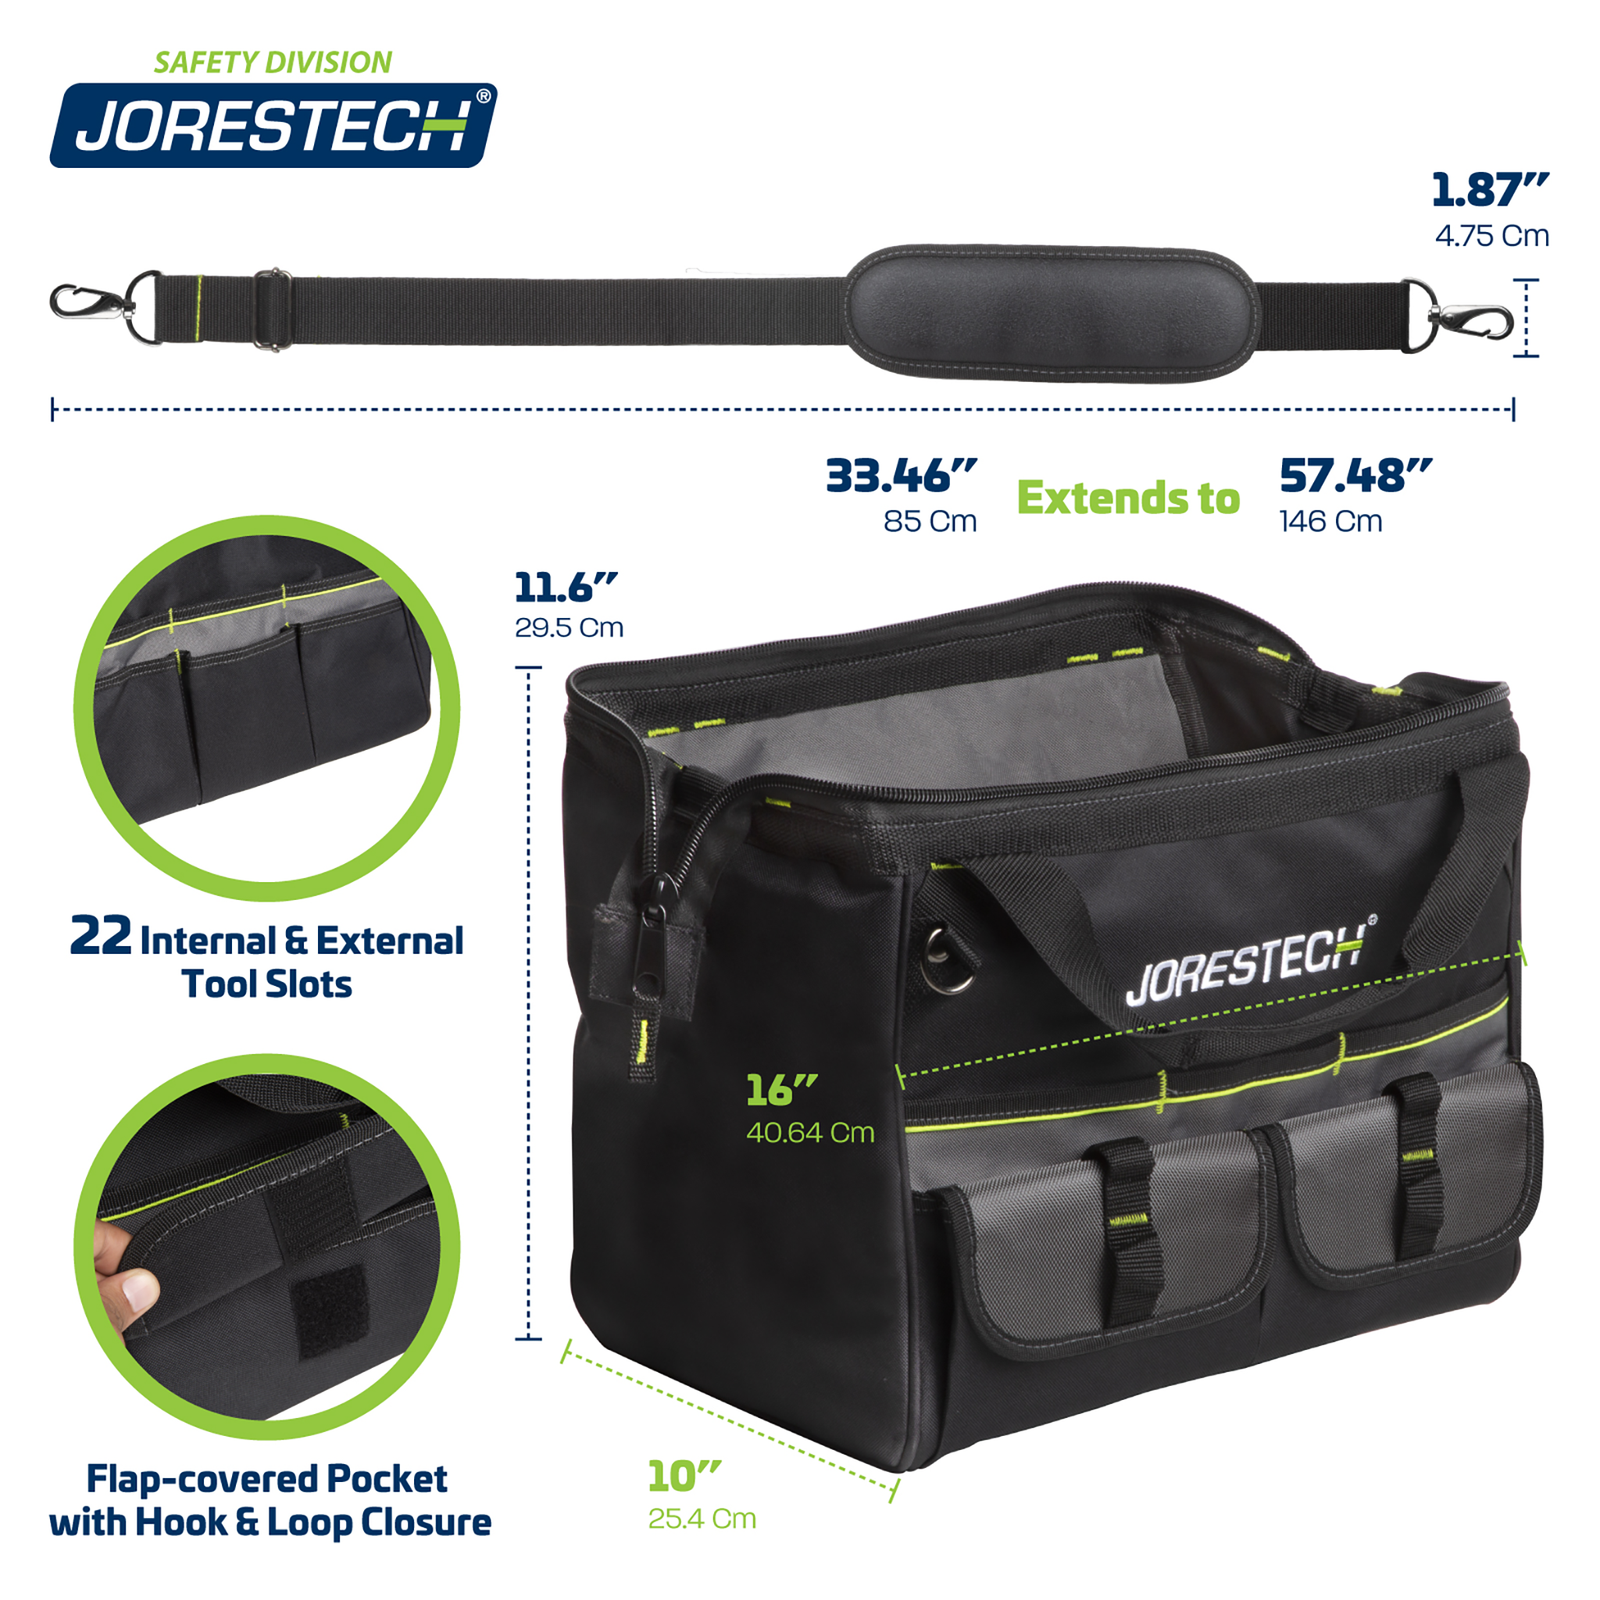 Showing measurements tool bag: Length of Tool's bag carrying strap: extends from 33.45